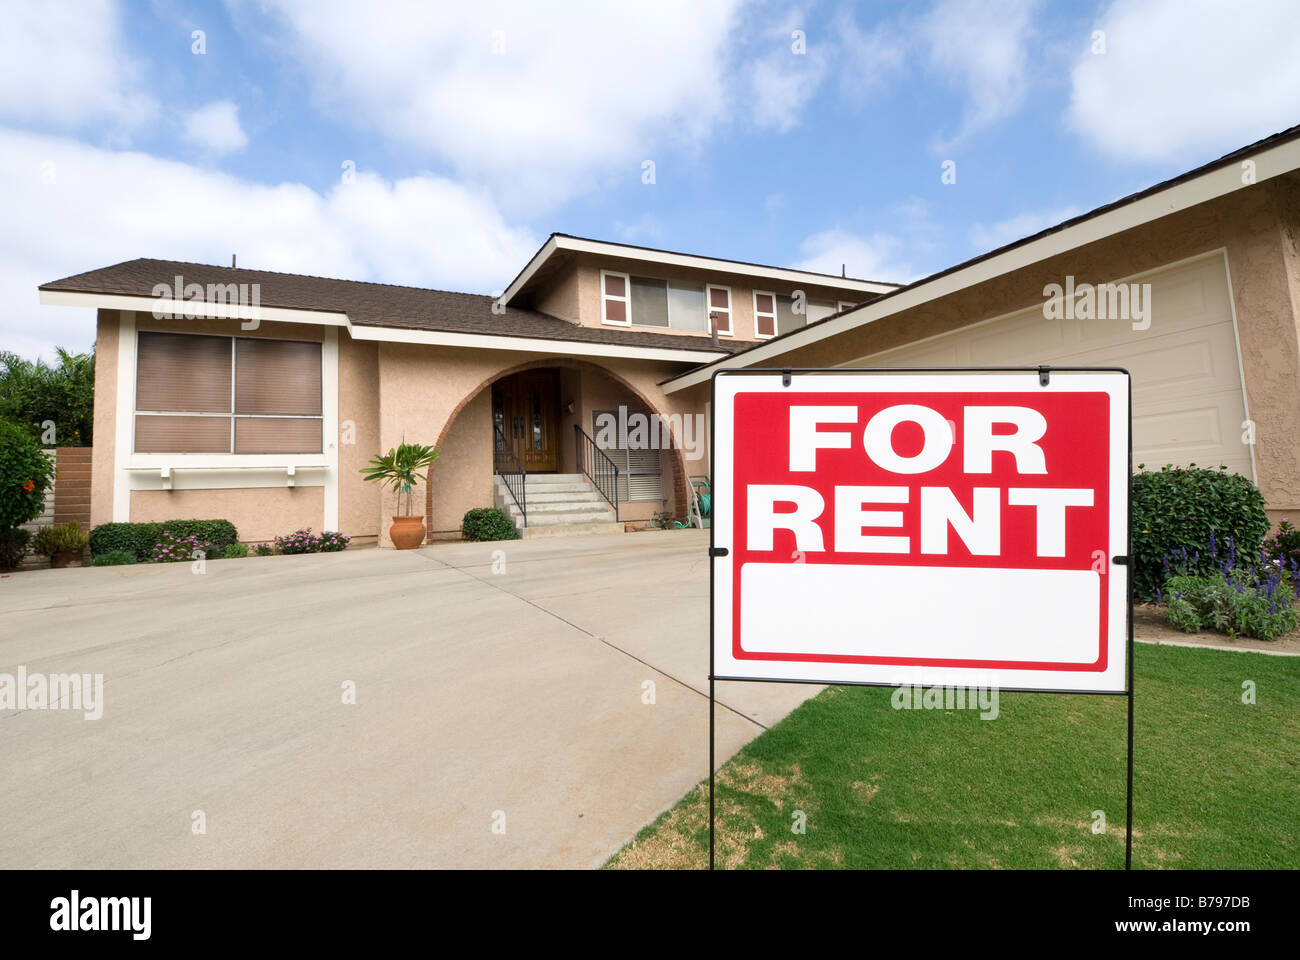 A home is being rented during tough economic times Stock Photo